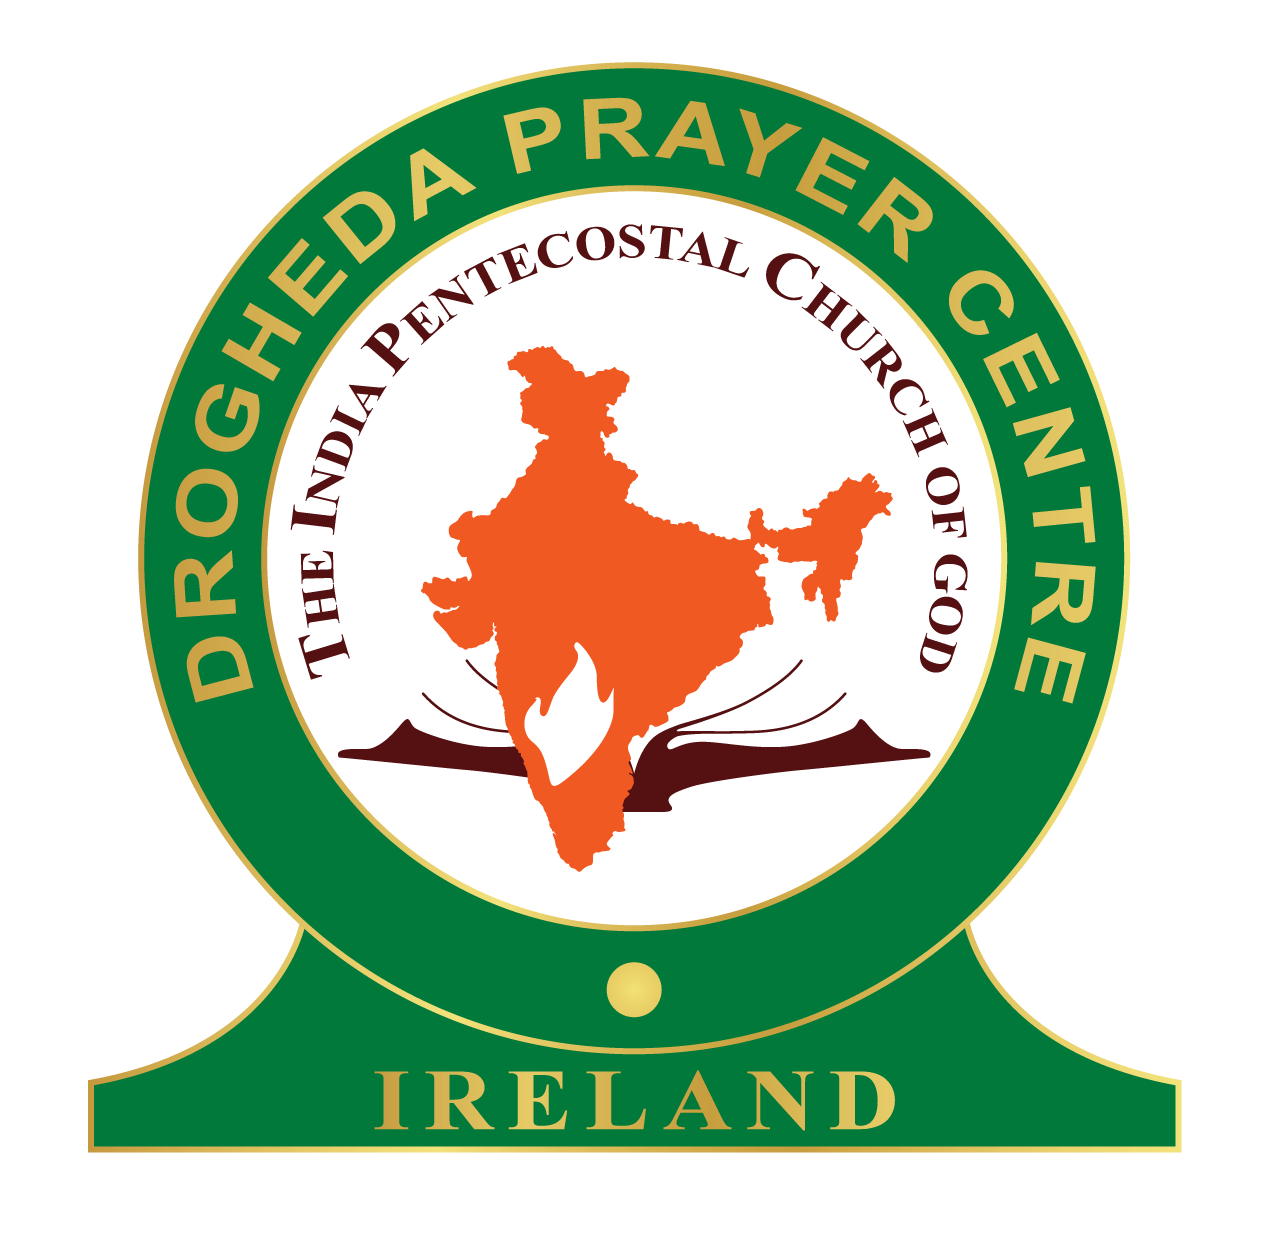 Logo of Drogheda Prayer Centre featuring a cross and a dove, symbolizing peace and the Holy Spirit.